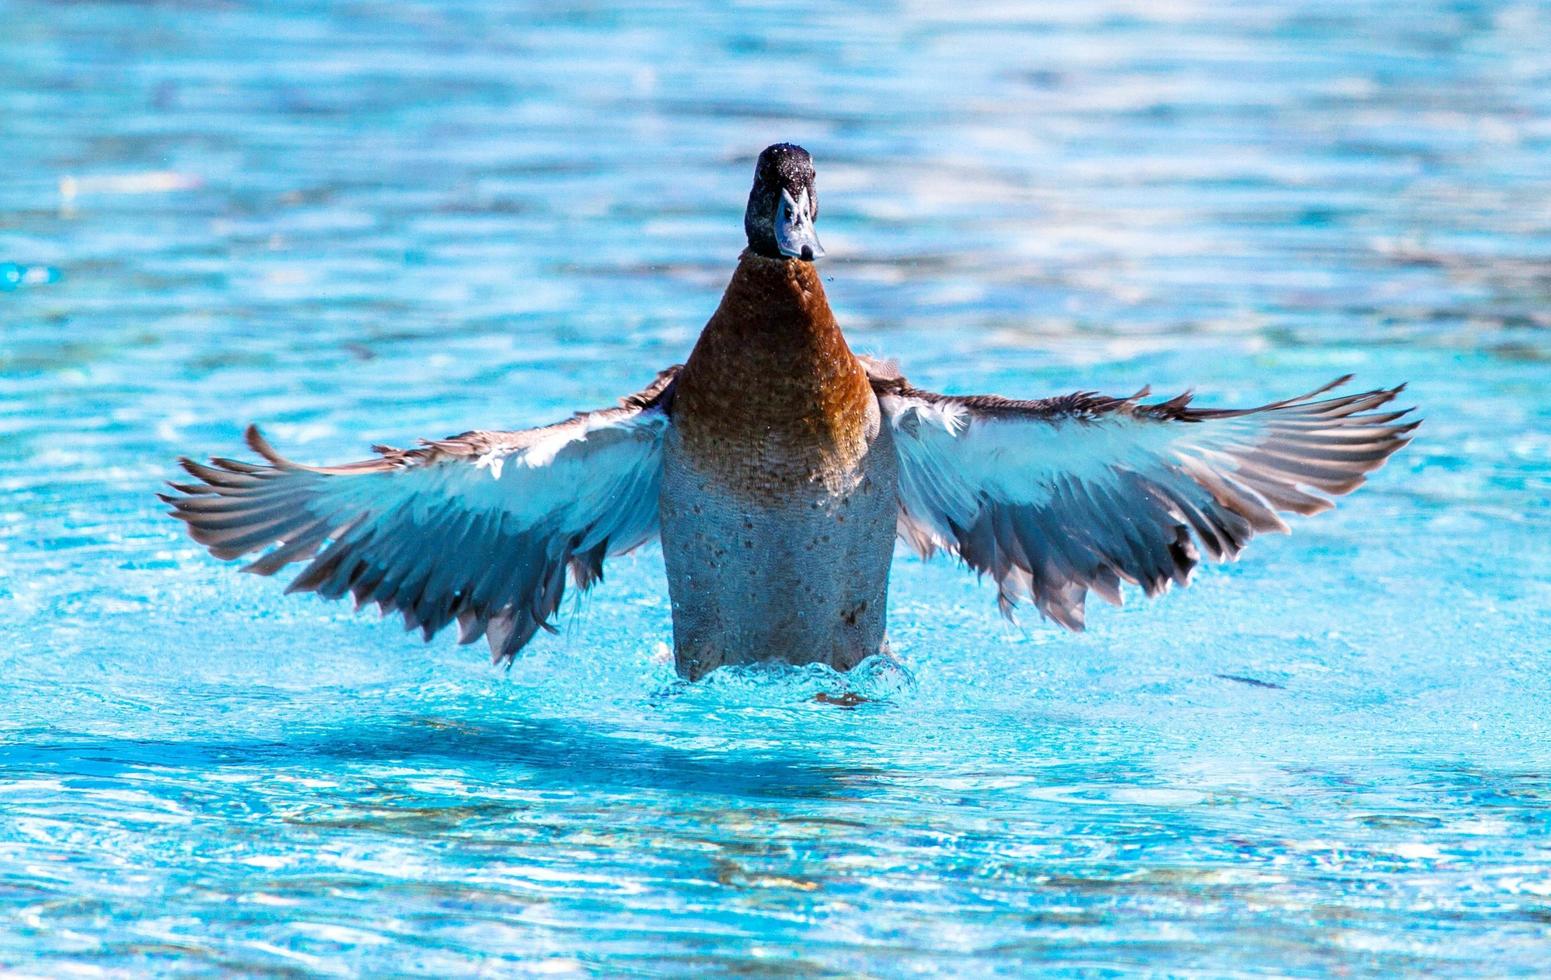 Duck spreading wings in a pool photo